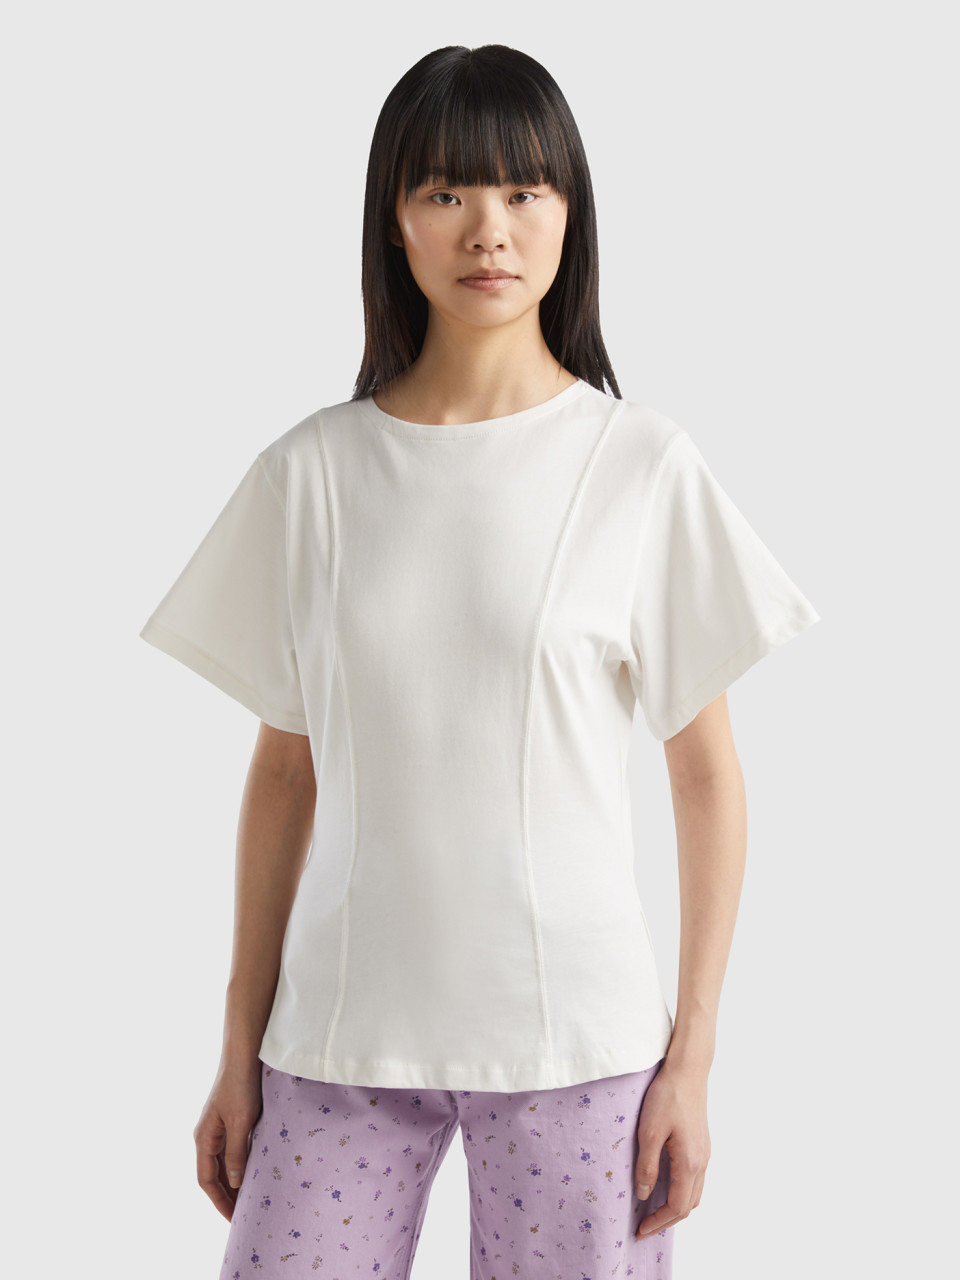 Benetton, Warmes Tailliertes T-shirt, Cremeweiss, female